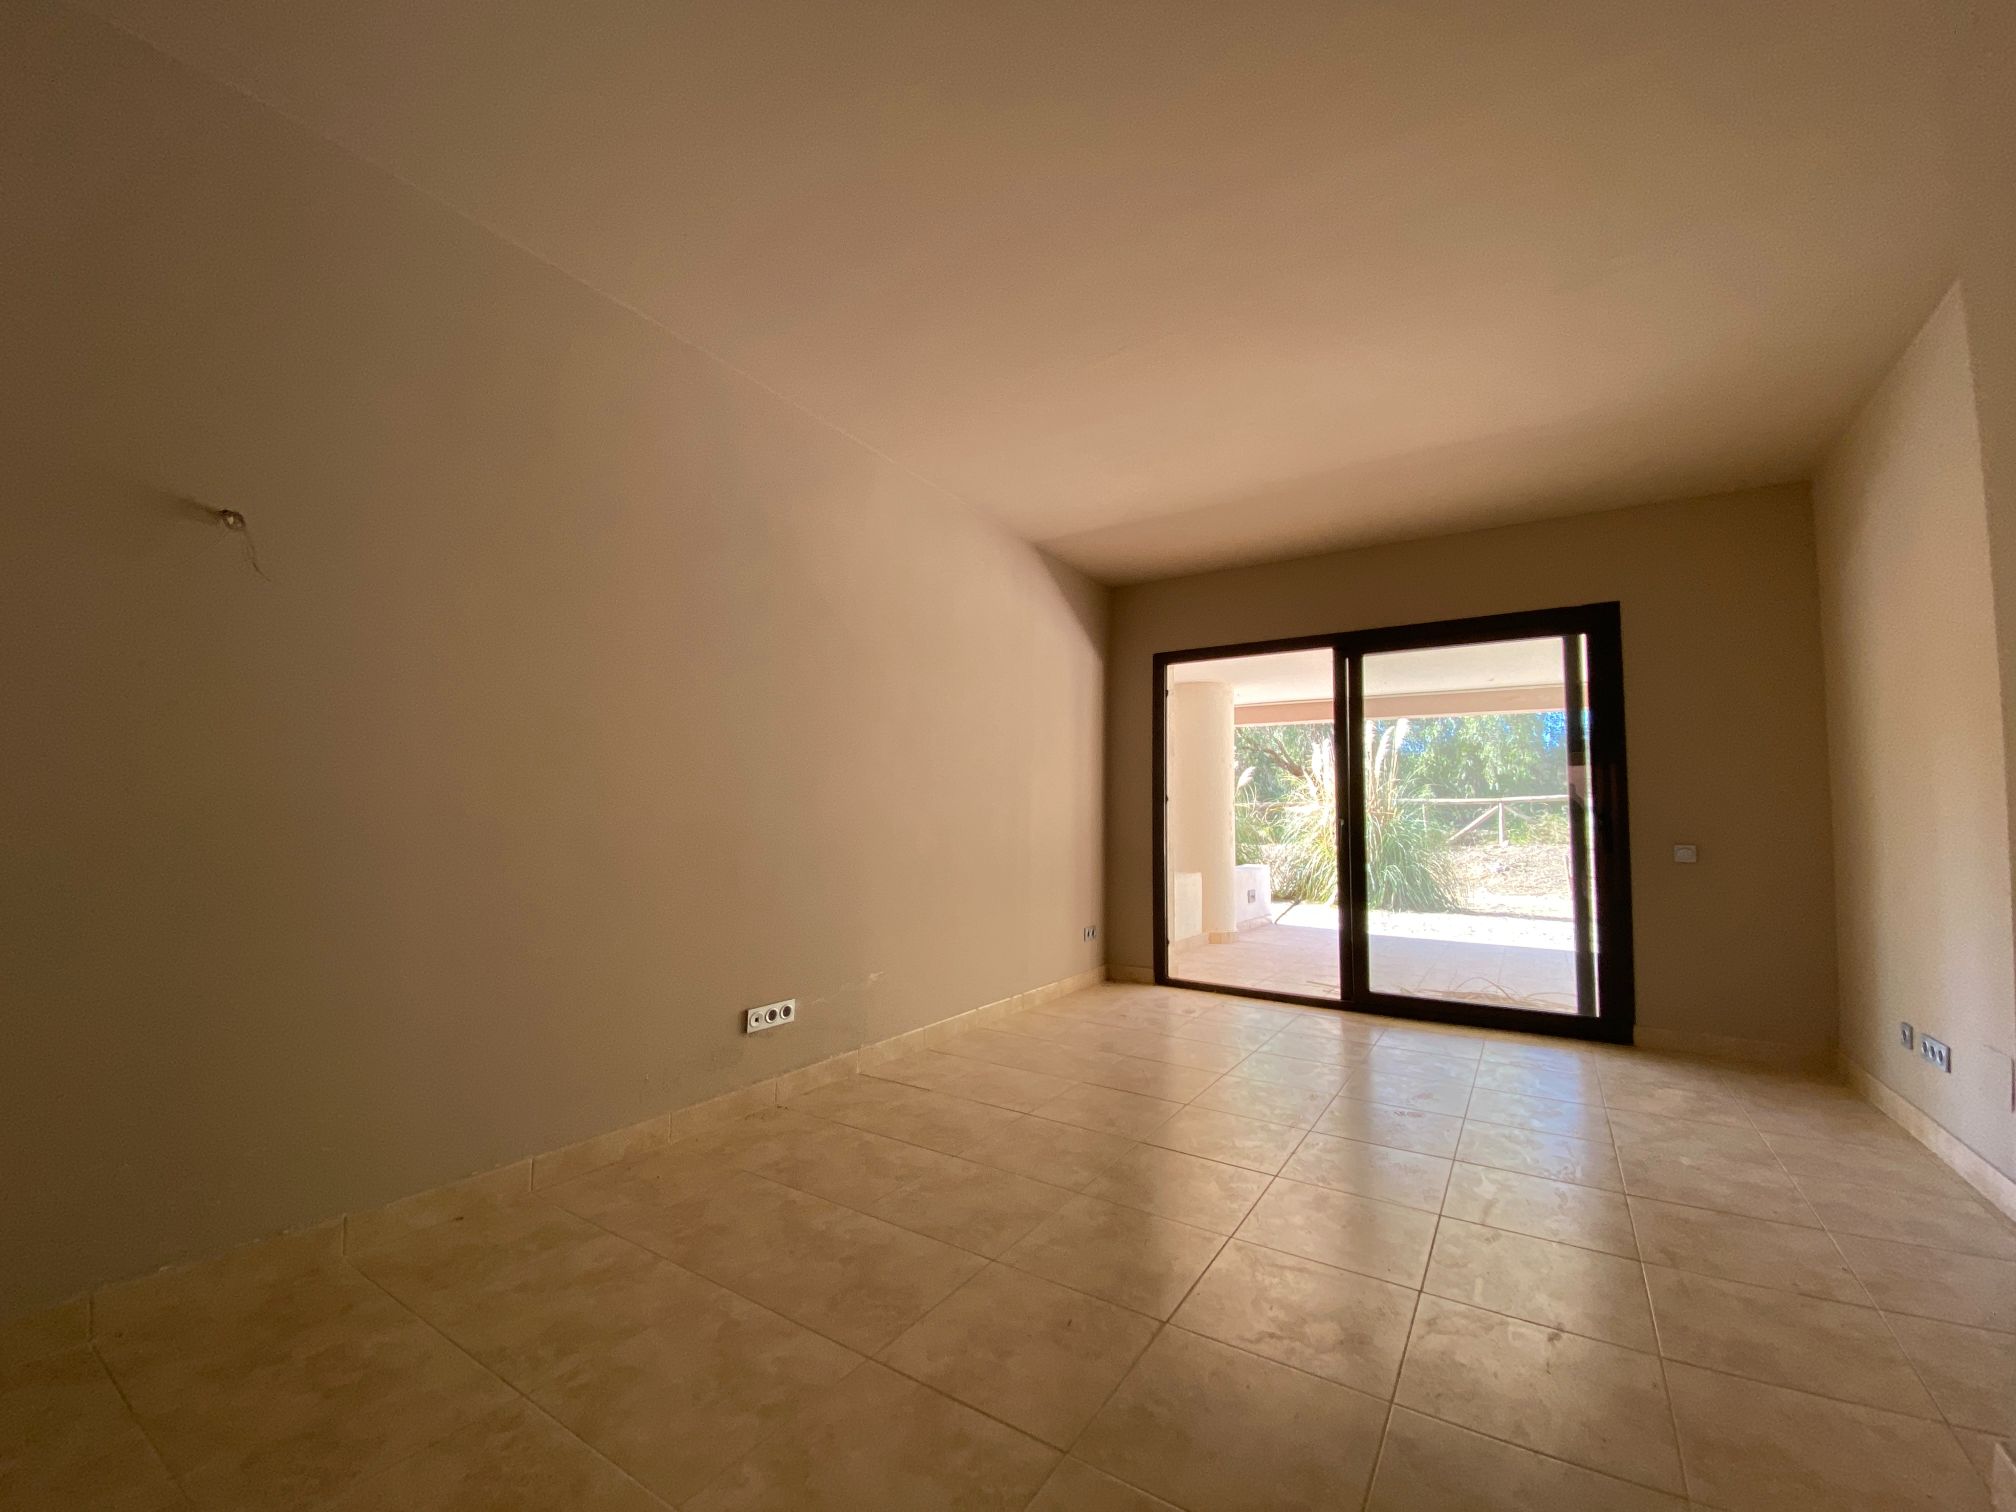 Townhouse for sale in Vera and surroundings 10